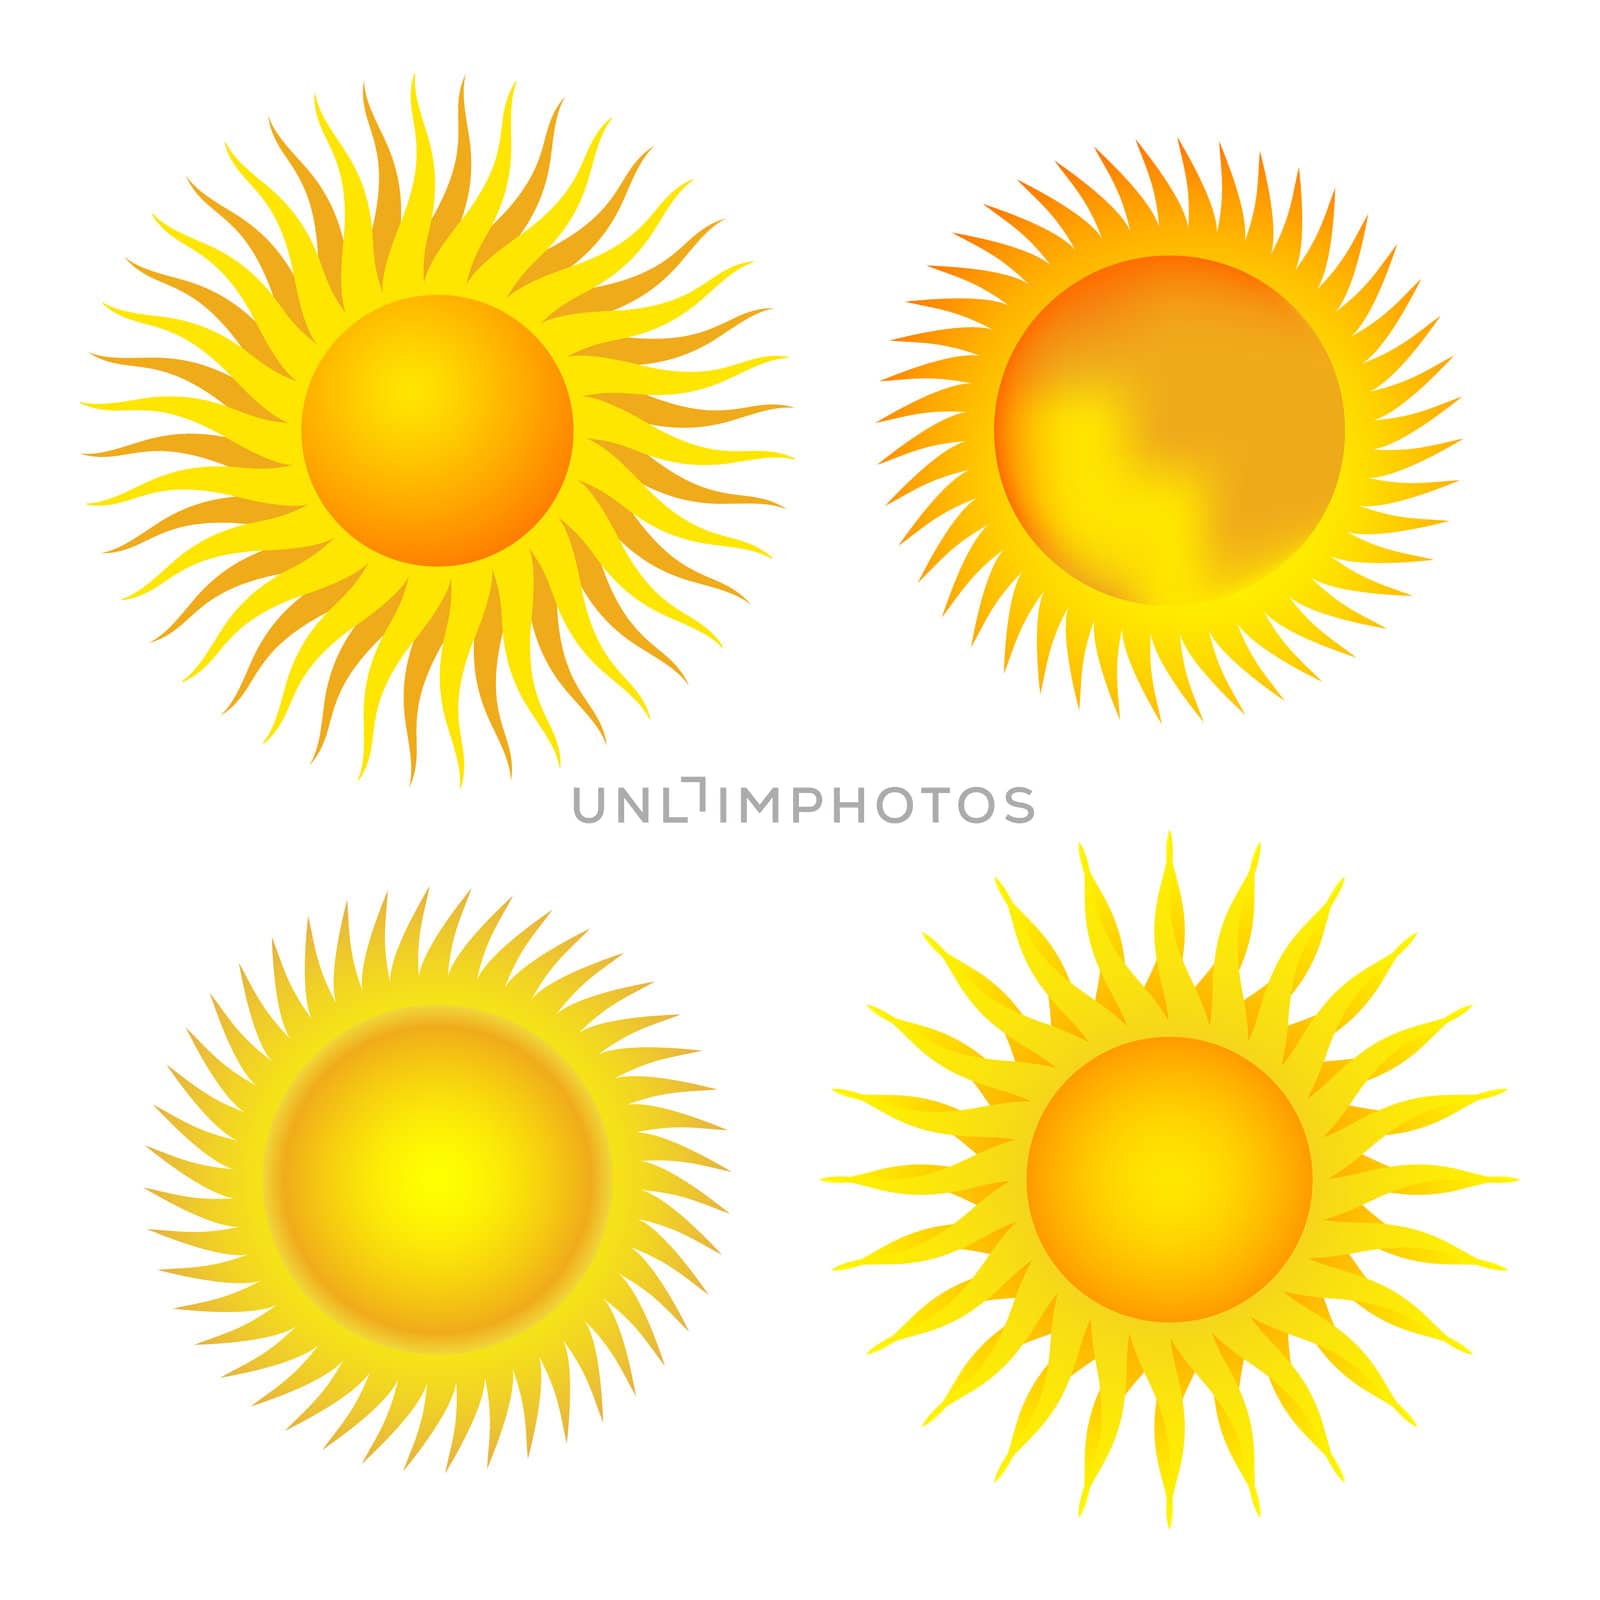 Four Bitmap Illustrations of the Sun